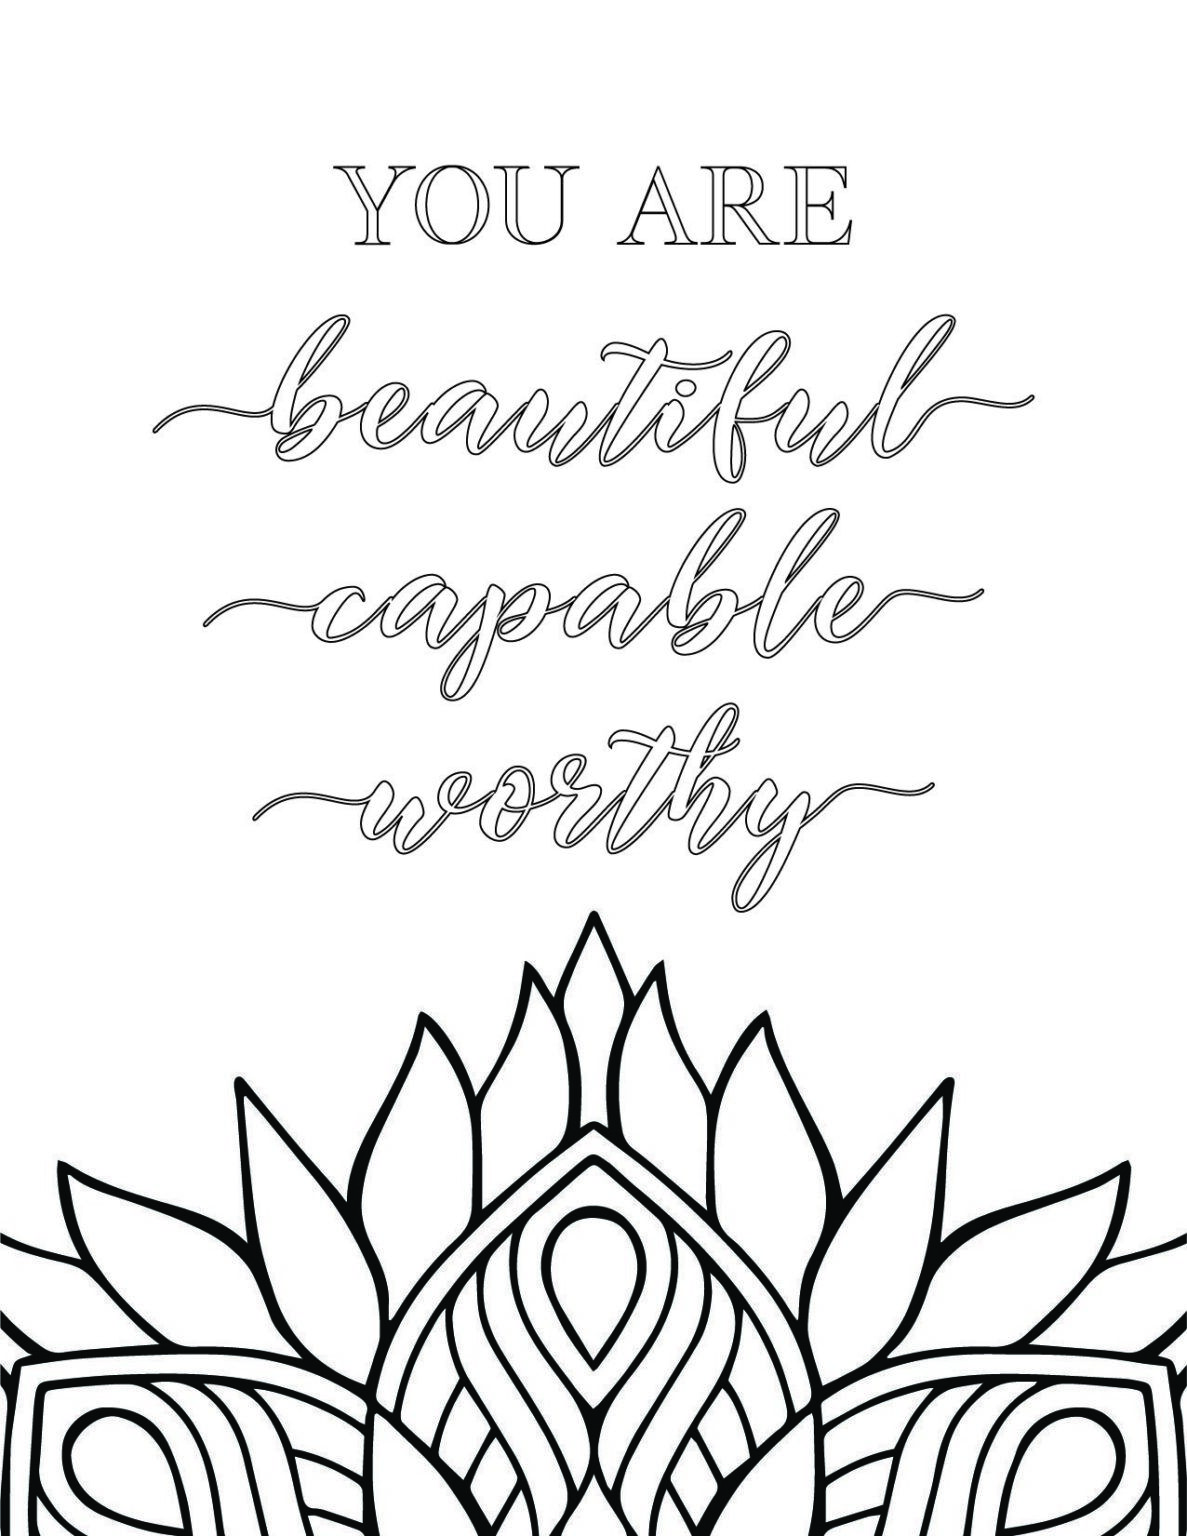 Best printable inspirational quote coloring pages